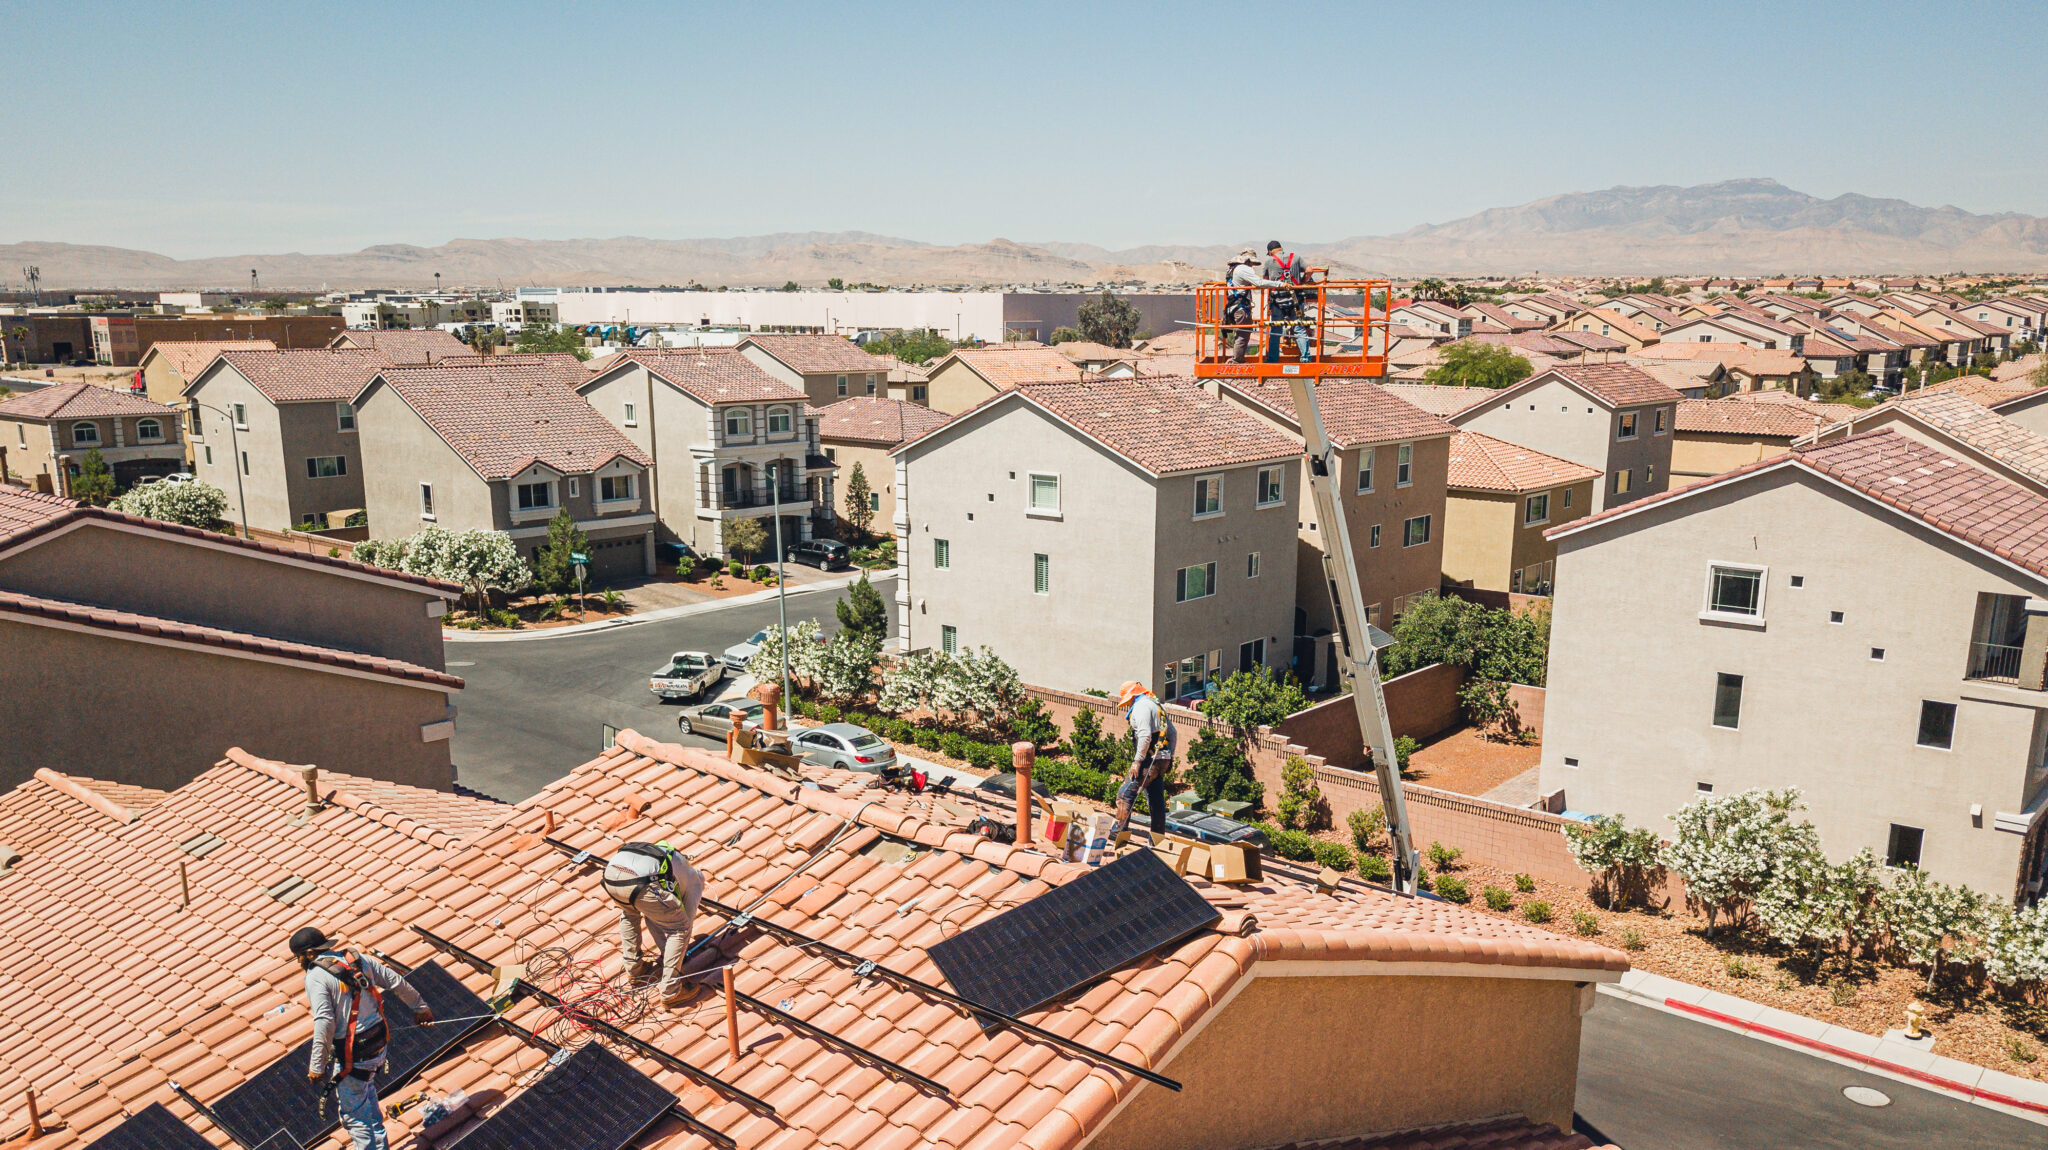 Solar panels being installed on a roof in Las Vegas